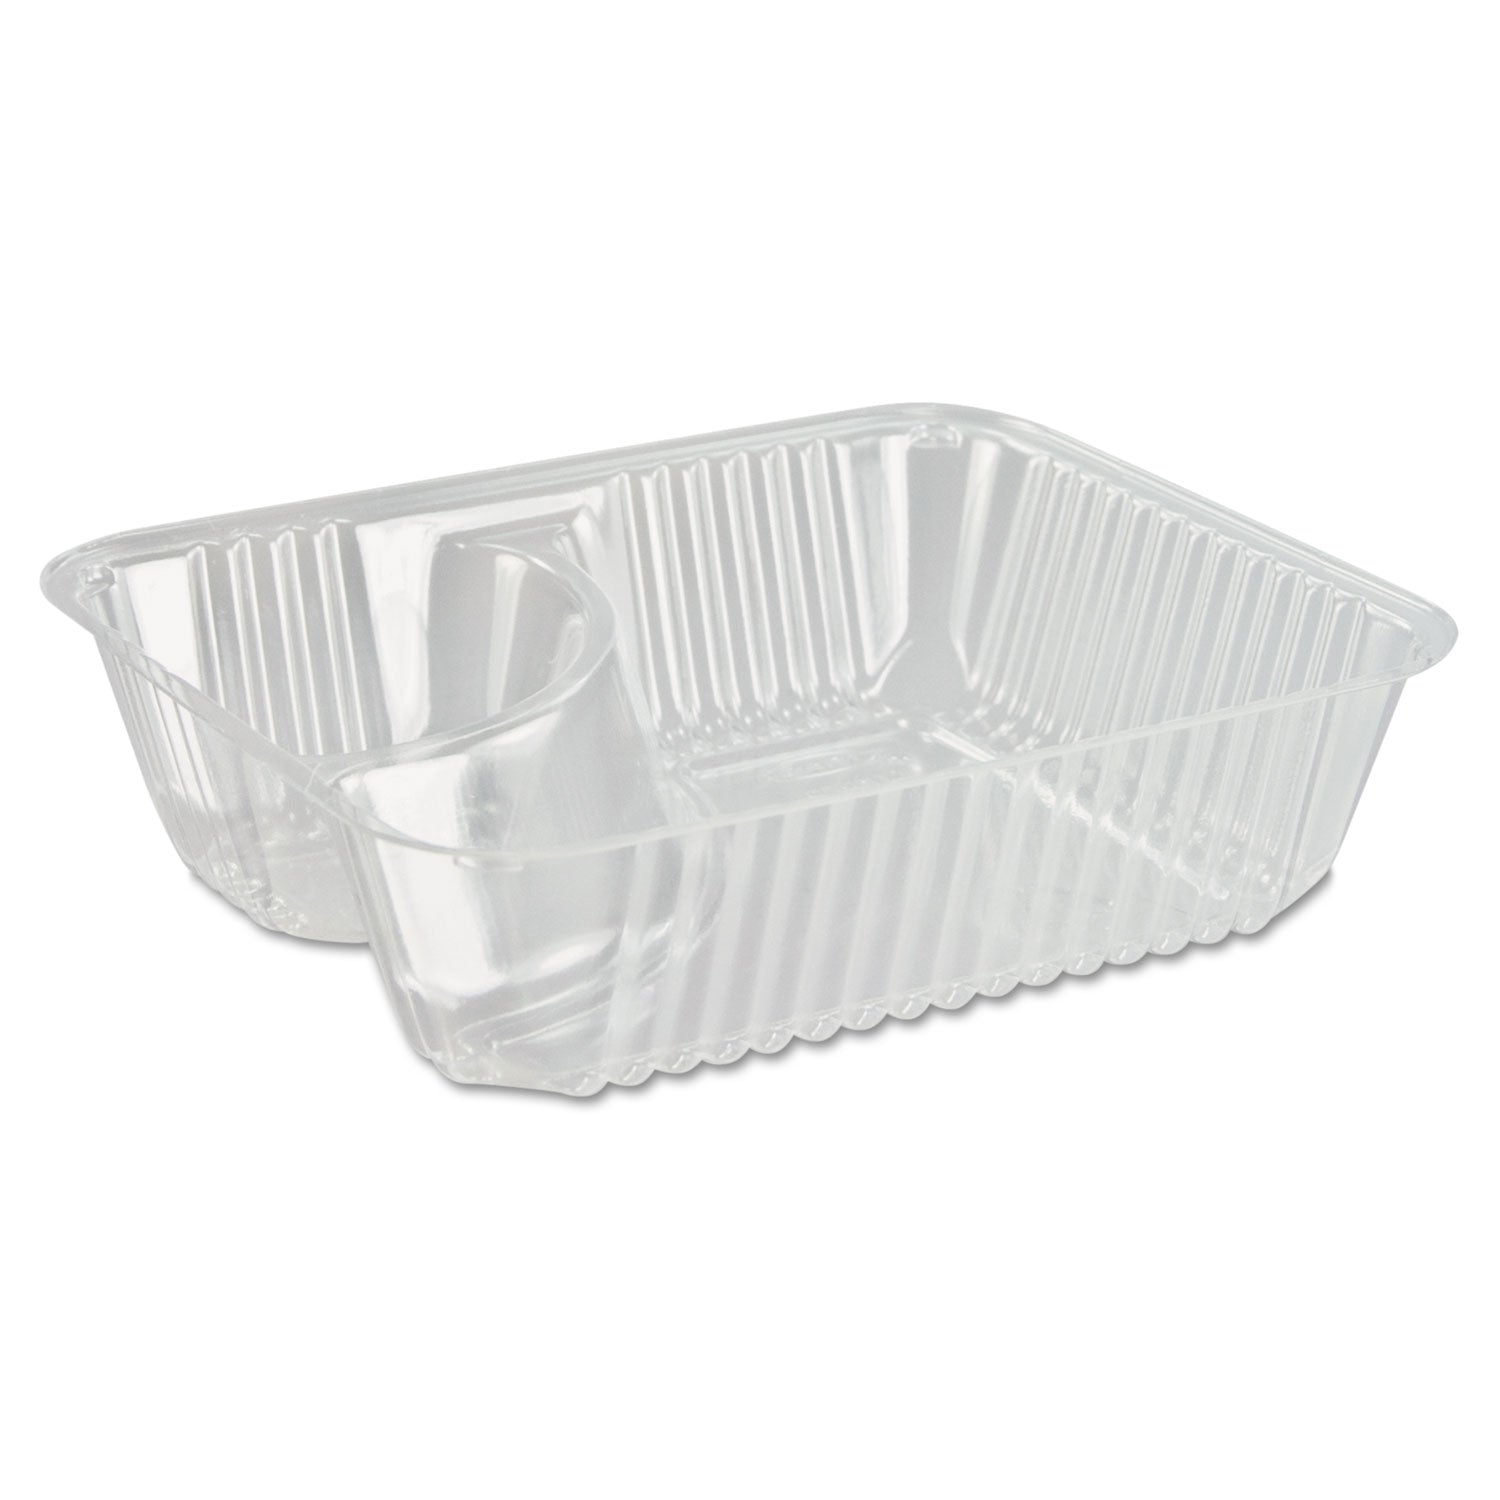 clearpac-small-nacho-tray-2-compartments-5-x-6-x-15-clear-plastic-125-bag-2-bags-carton_dccc56nt2 - 1